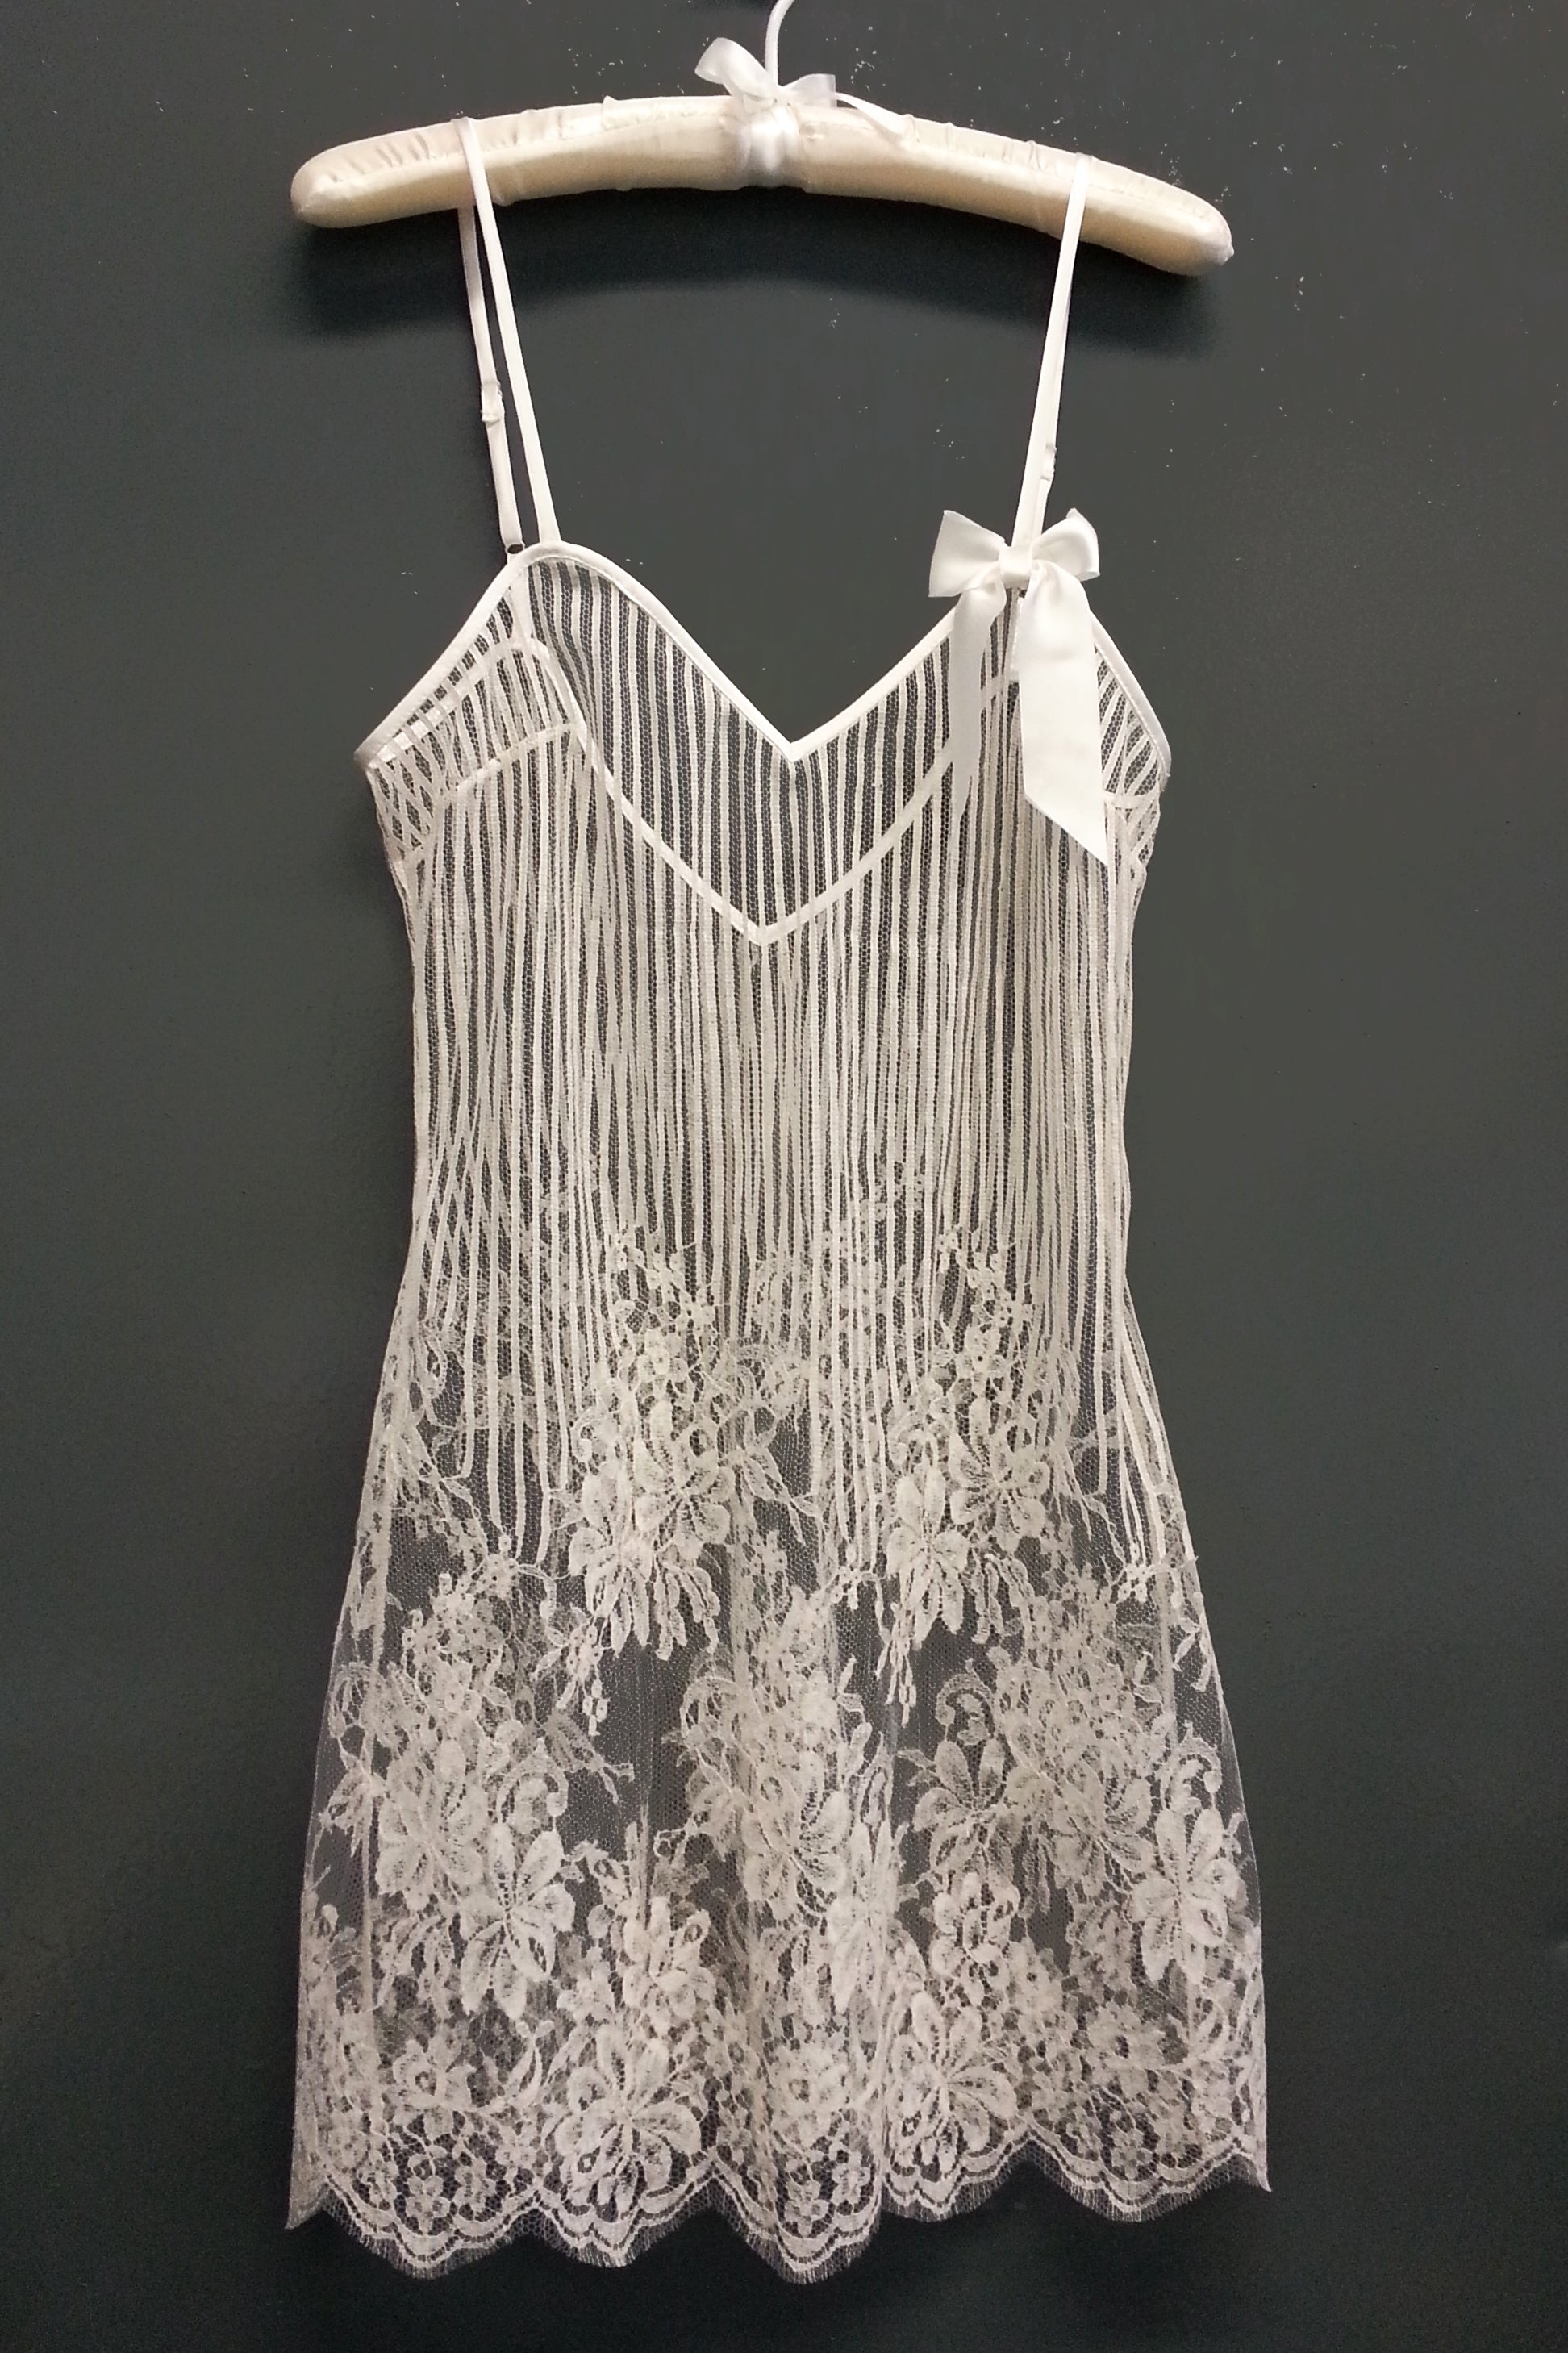 White French lace negligee and slip dress for brides